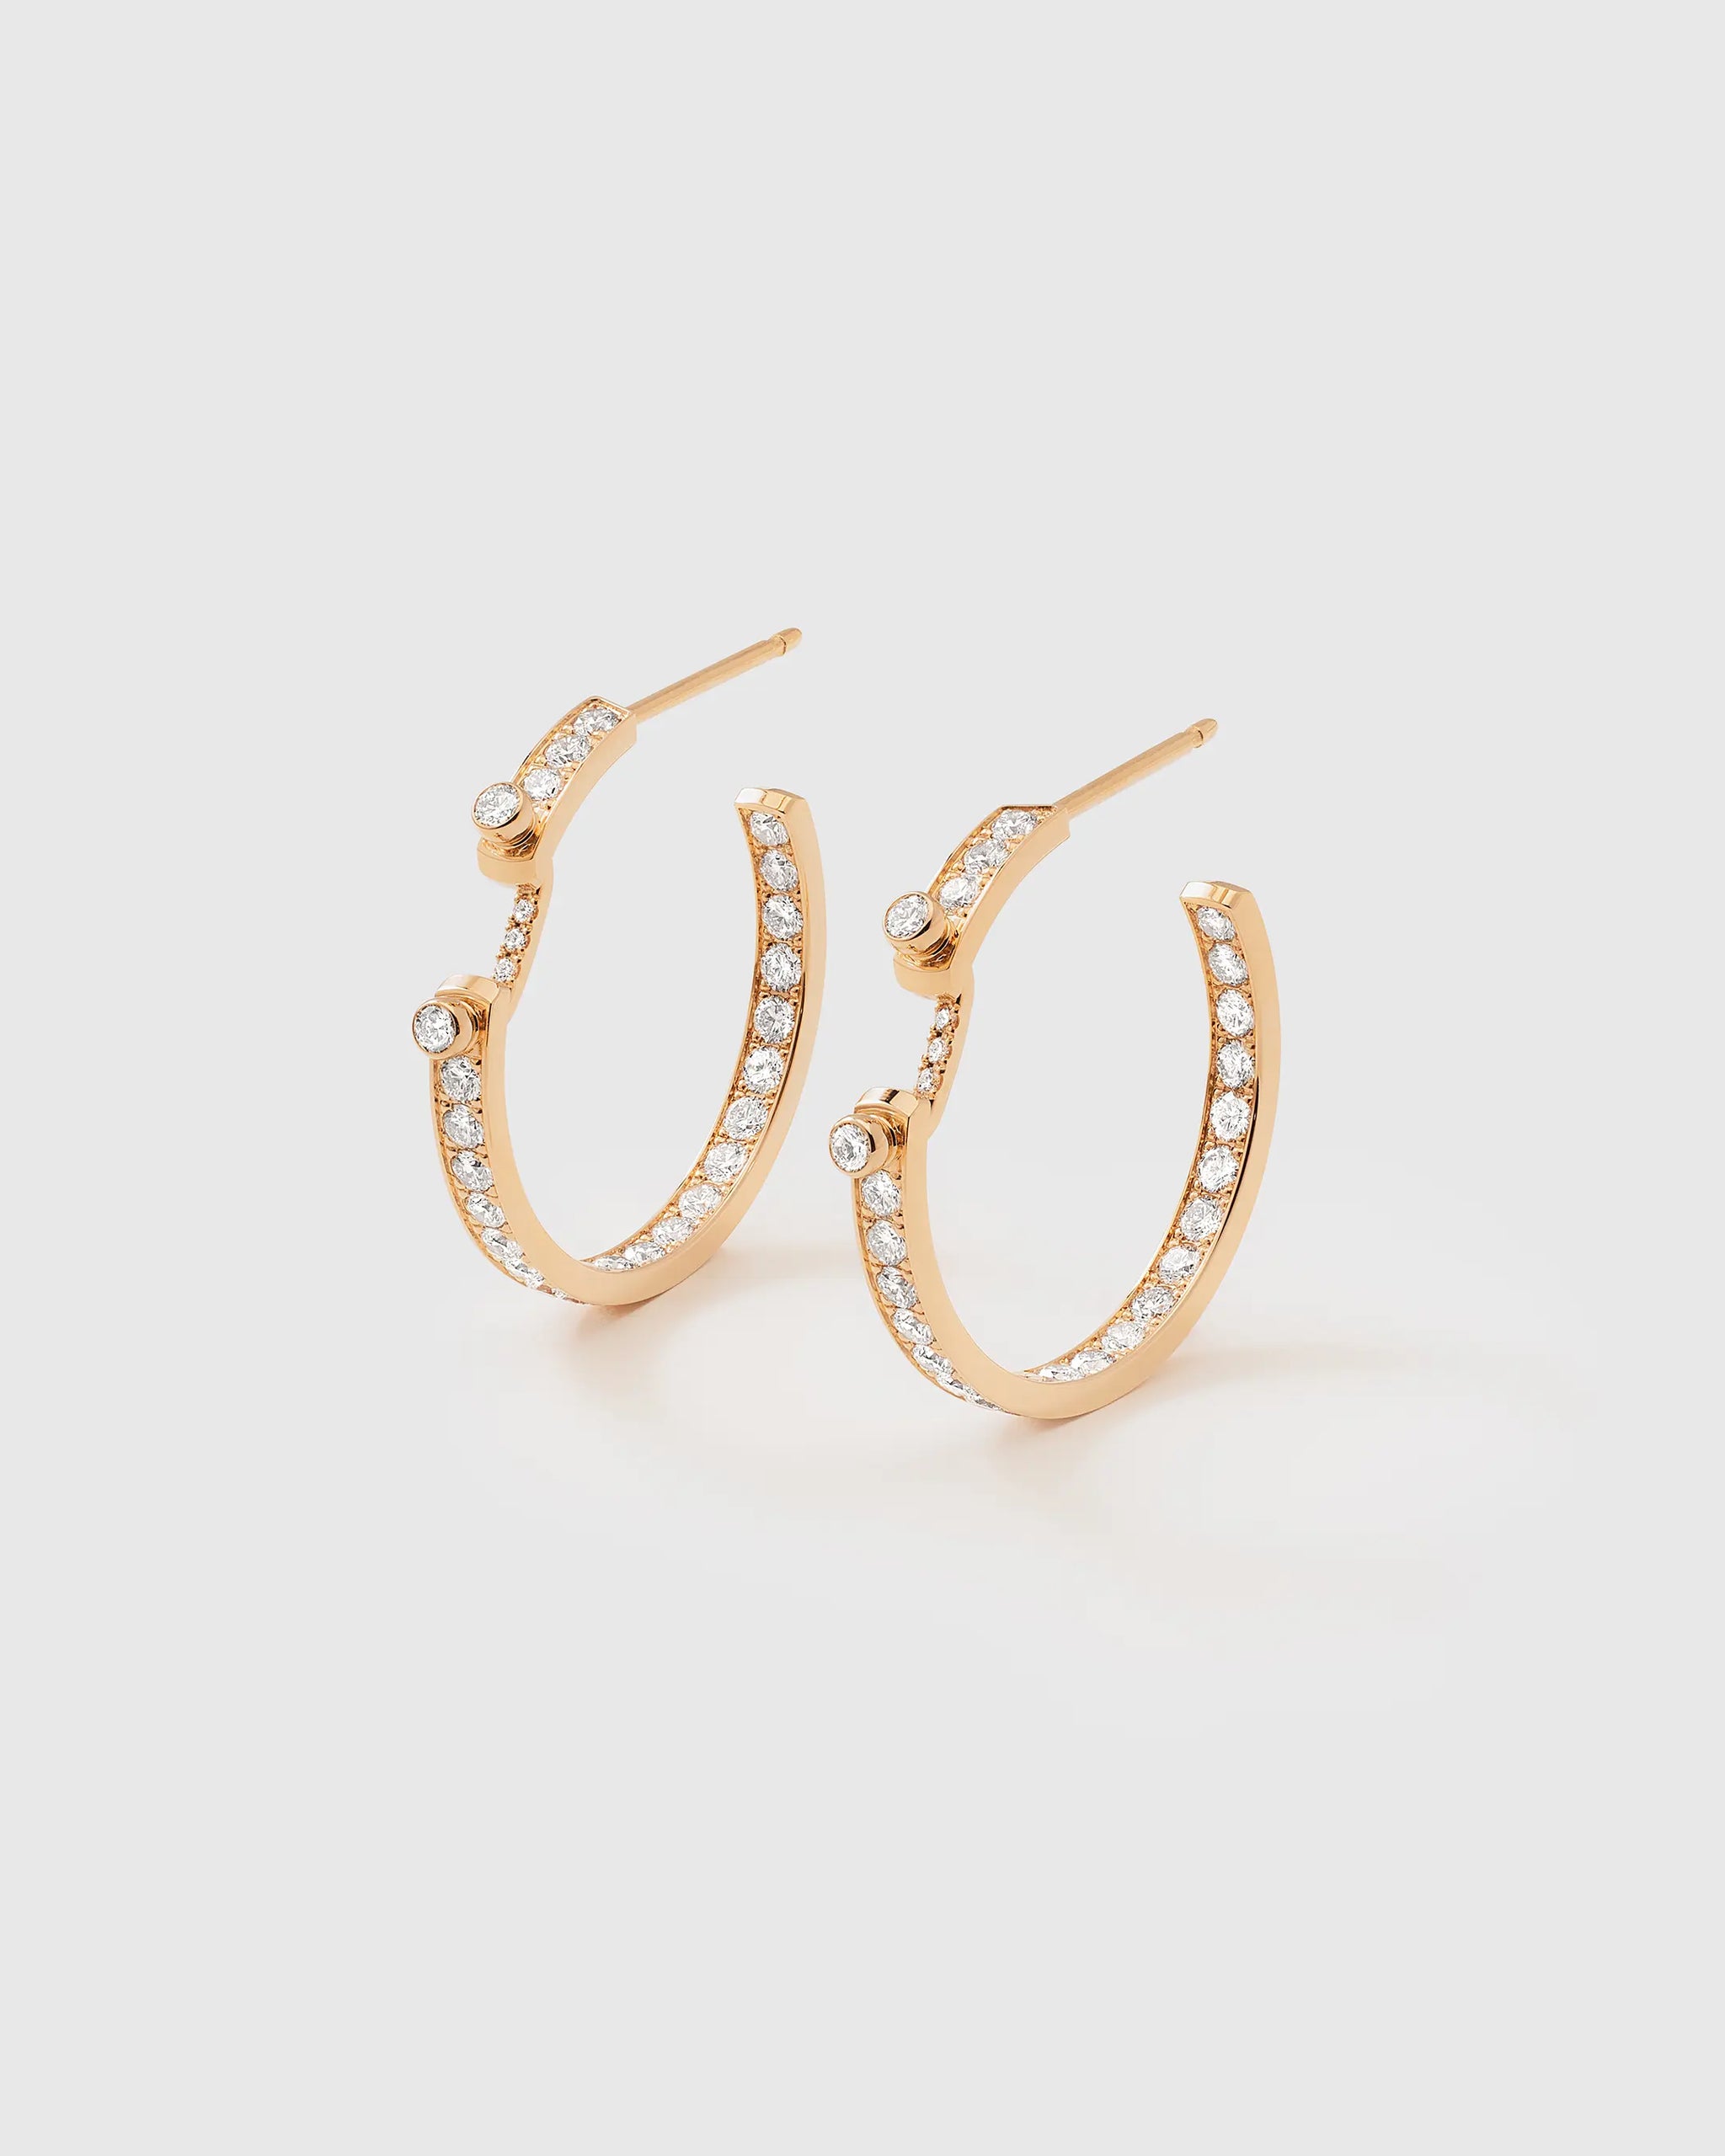 Eternity Tuxedo Mood Hoops in Rose Gold - 1 - Nouvel Heritage